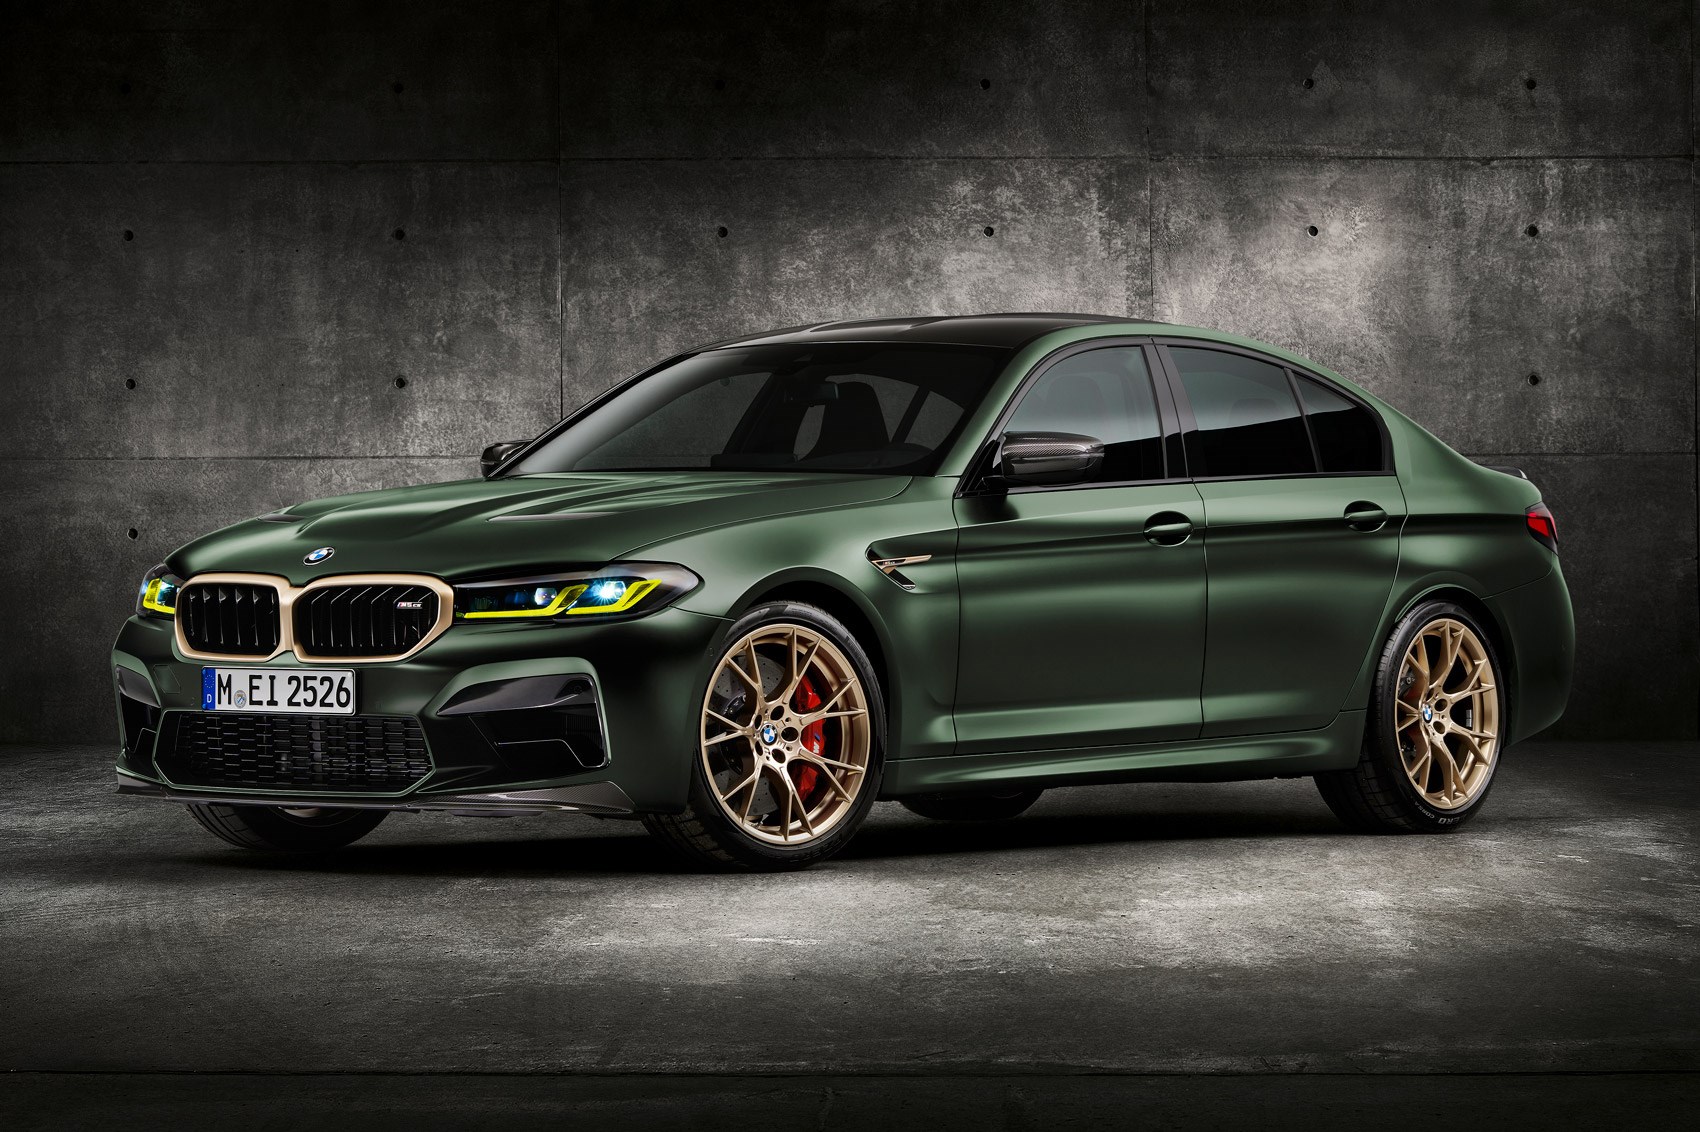 Meet The New BMW M5 Special Edition: The Fastest M Model Yet